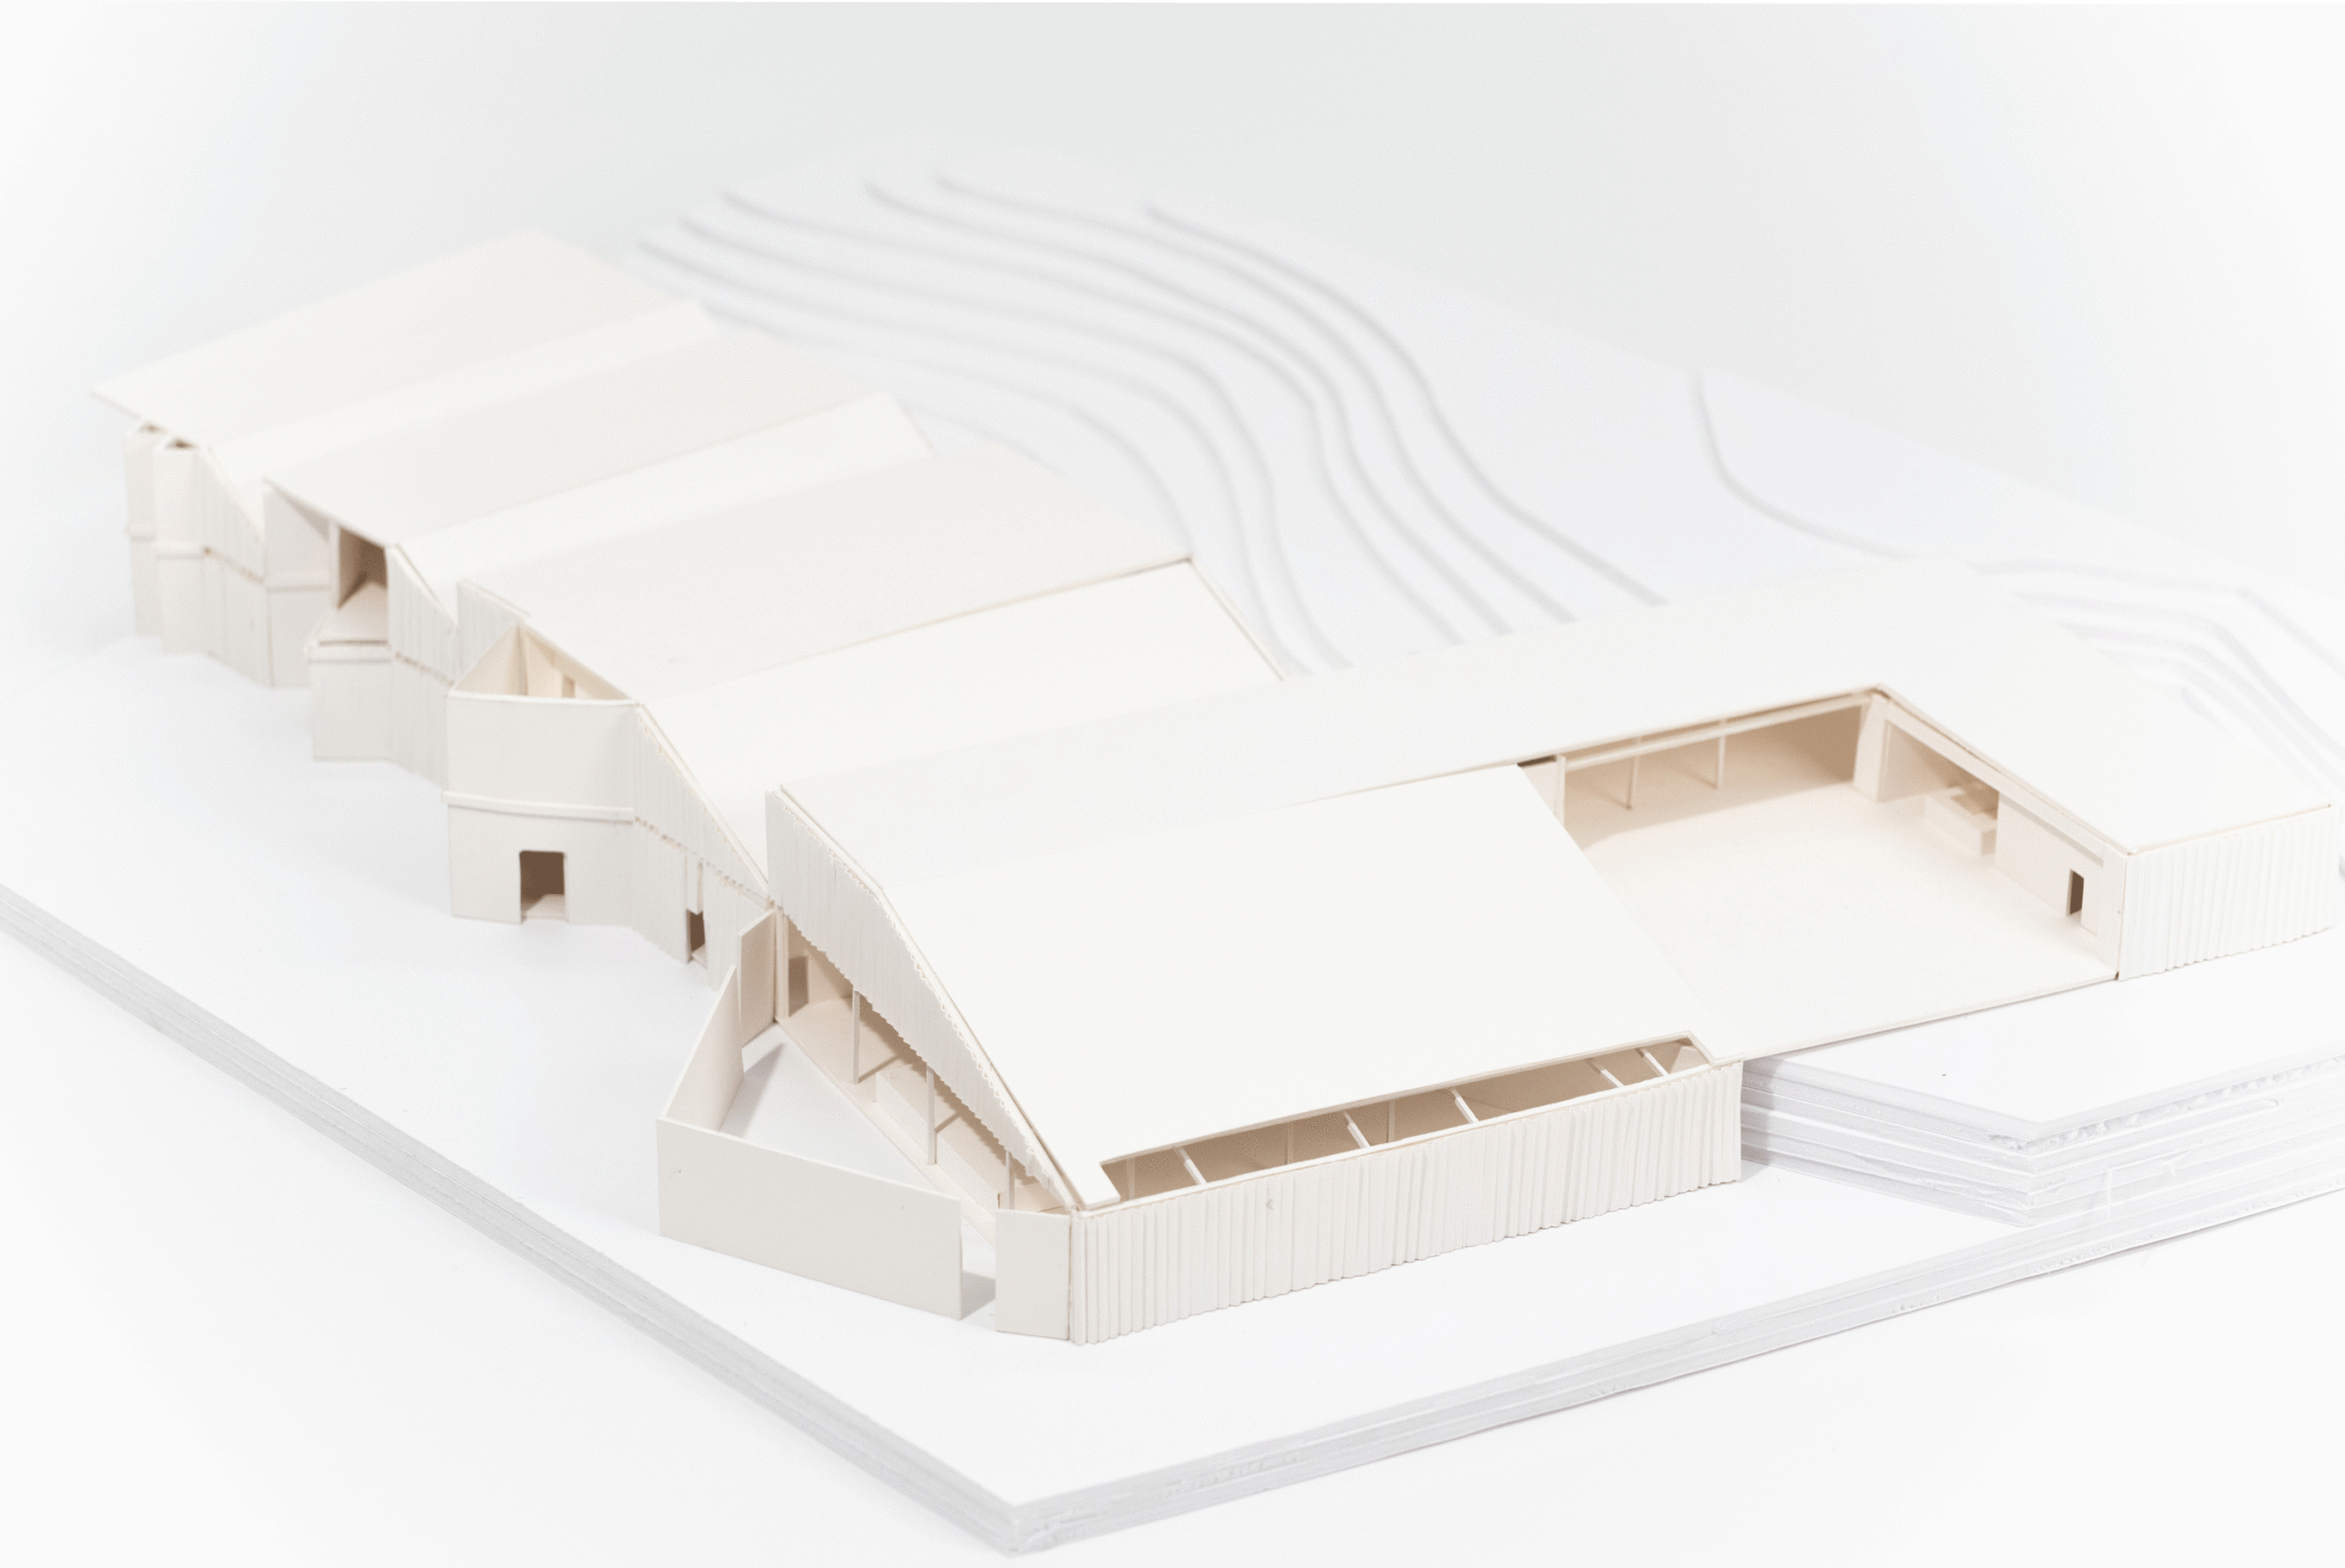 Gif of architecture model roof being removed and added